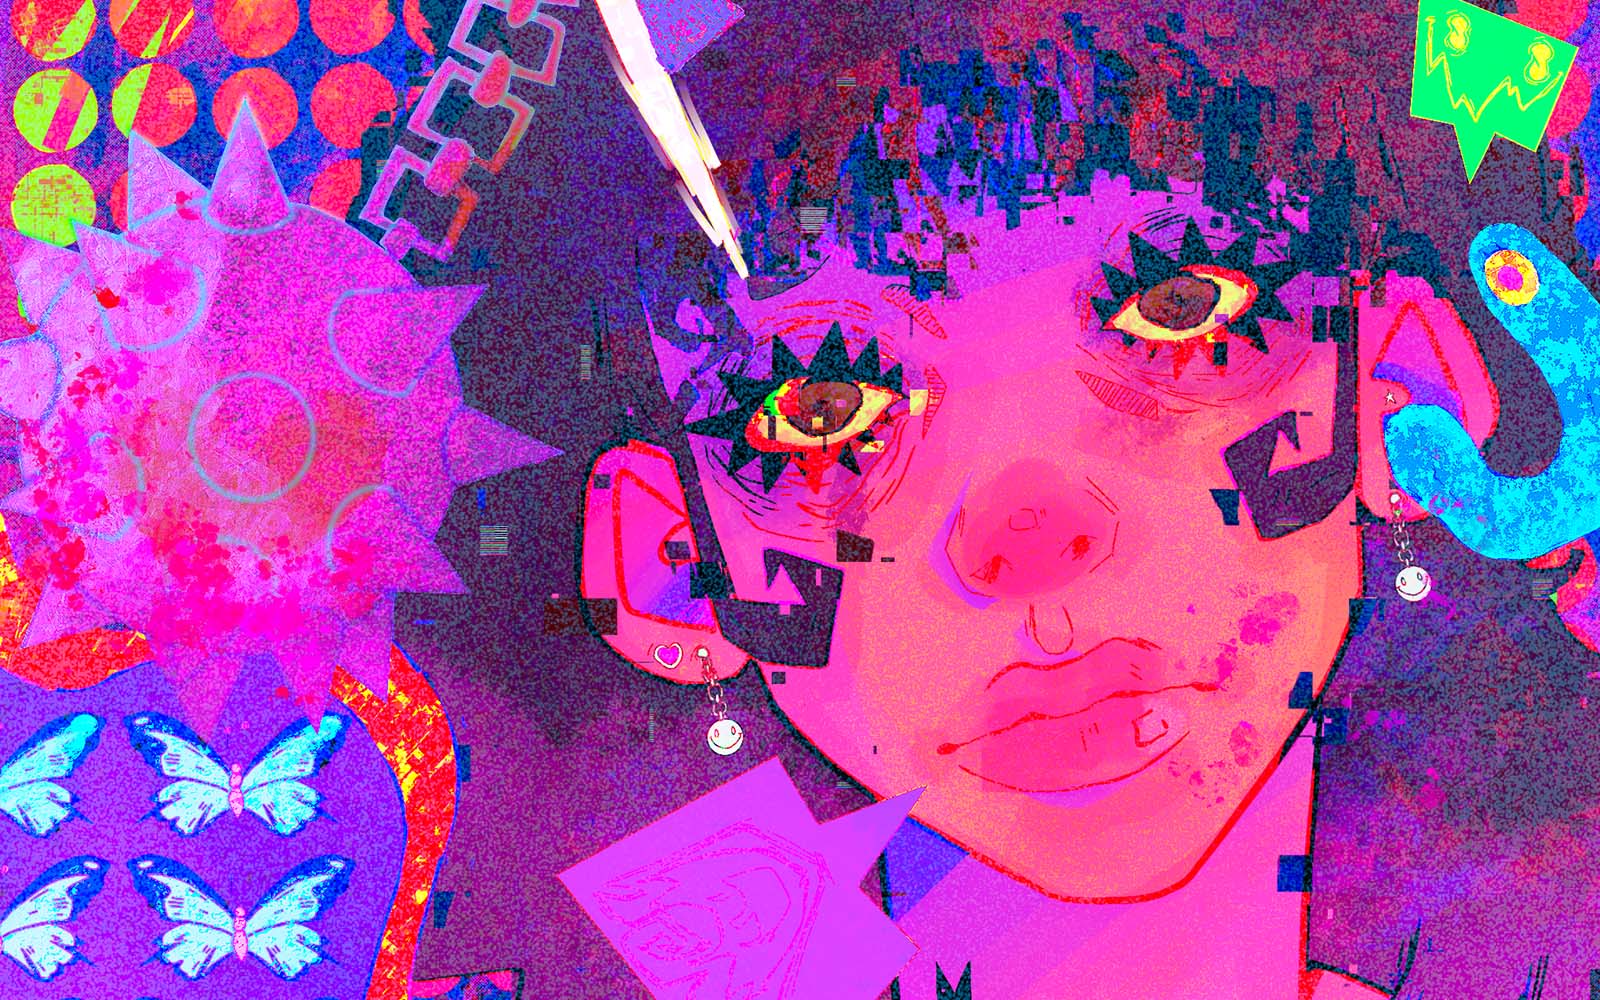 Digital illustration of a face in neon-bright pink, blue and red colors